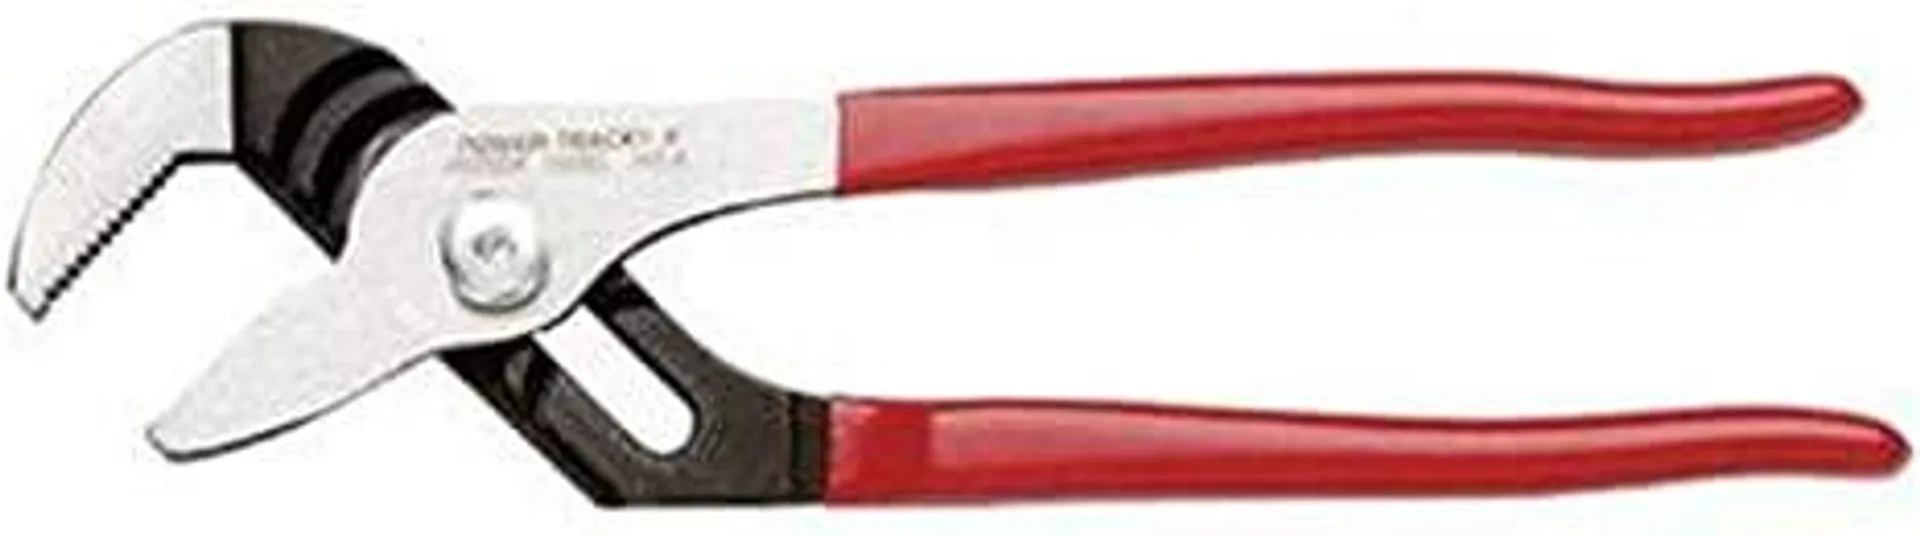 Stanley Proto J261SG Proto 4-5/8" Tongue & Groove Power-Track II Pliers w/Grip